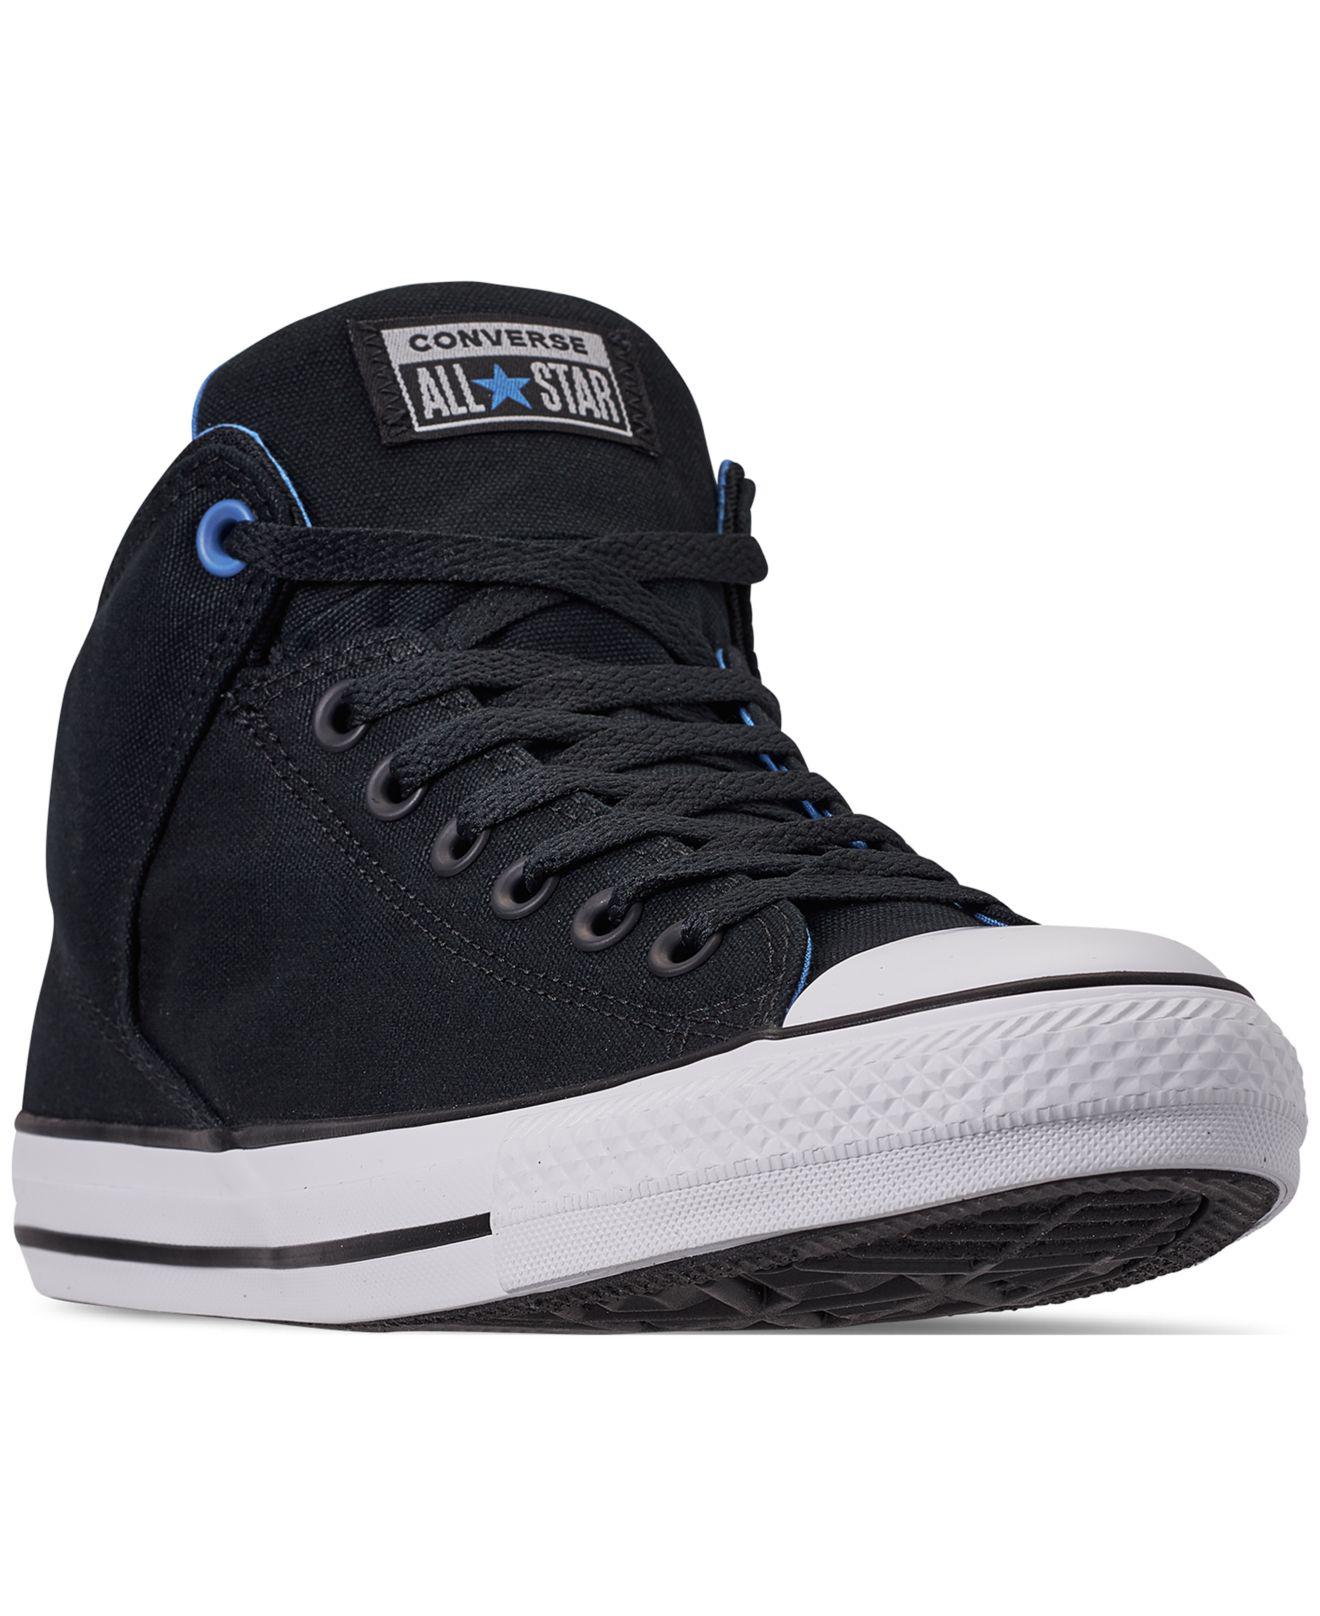 converse blue and black Online Shopping for Women, Men, Kids Fashion &  Lifestyle|Free Delivery & Returns! -